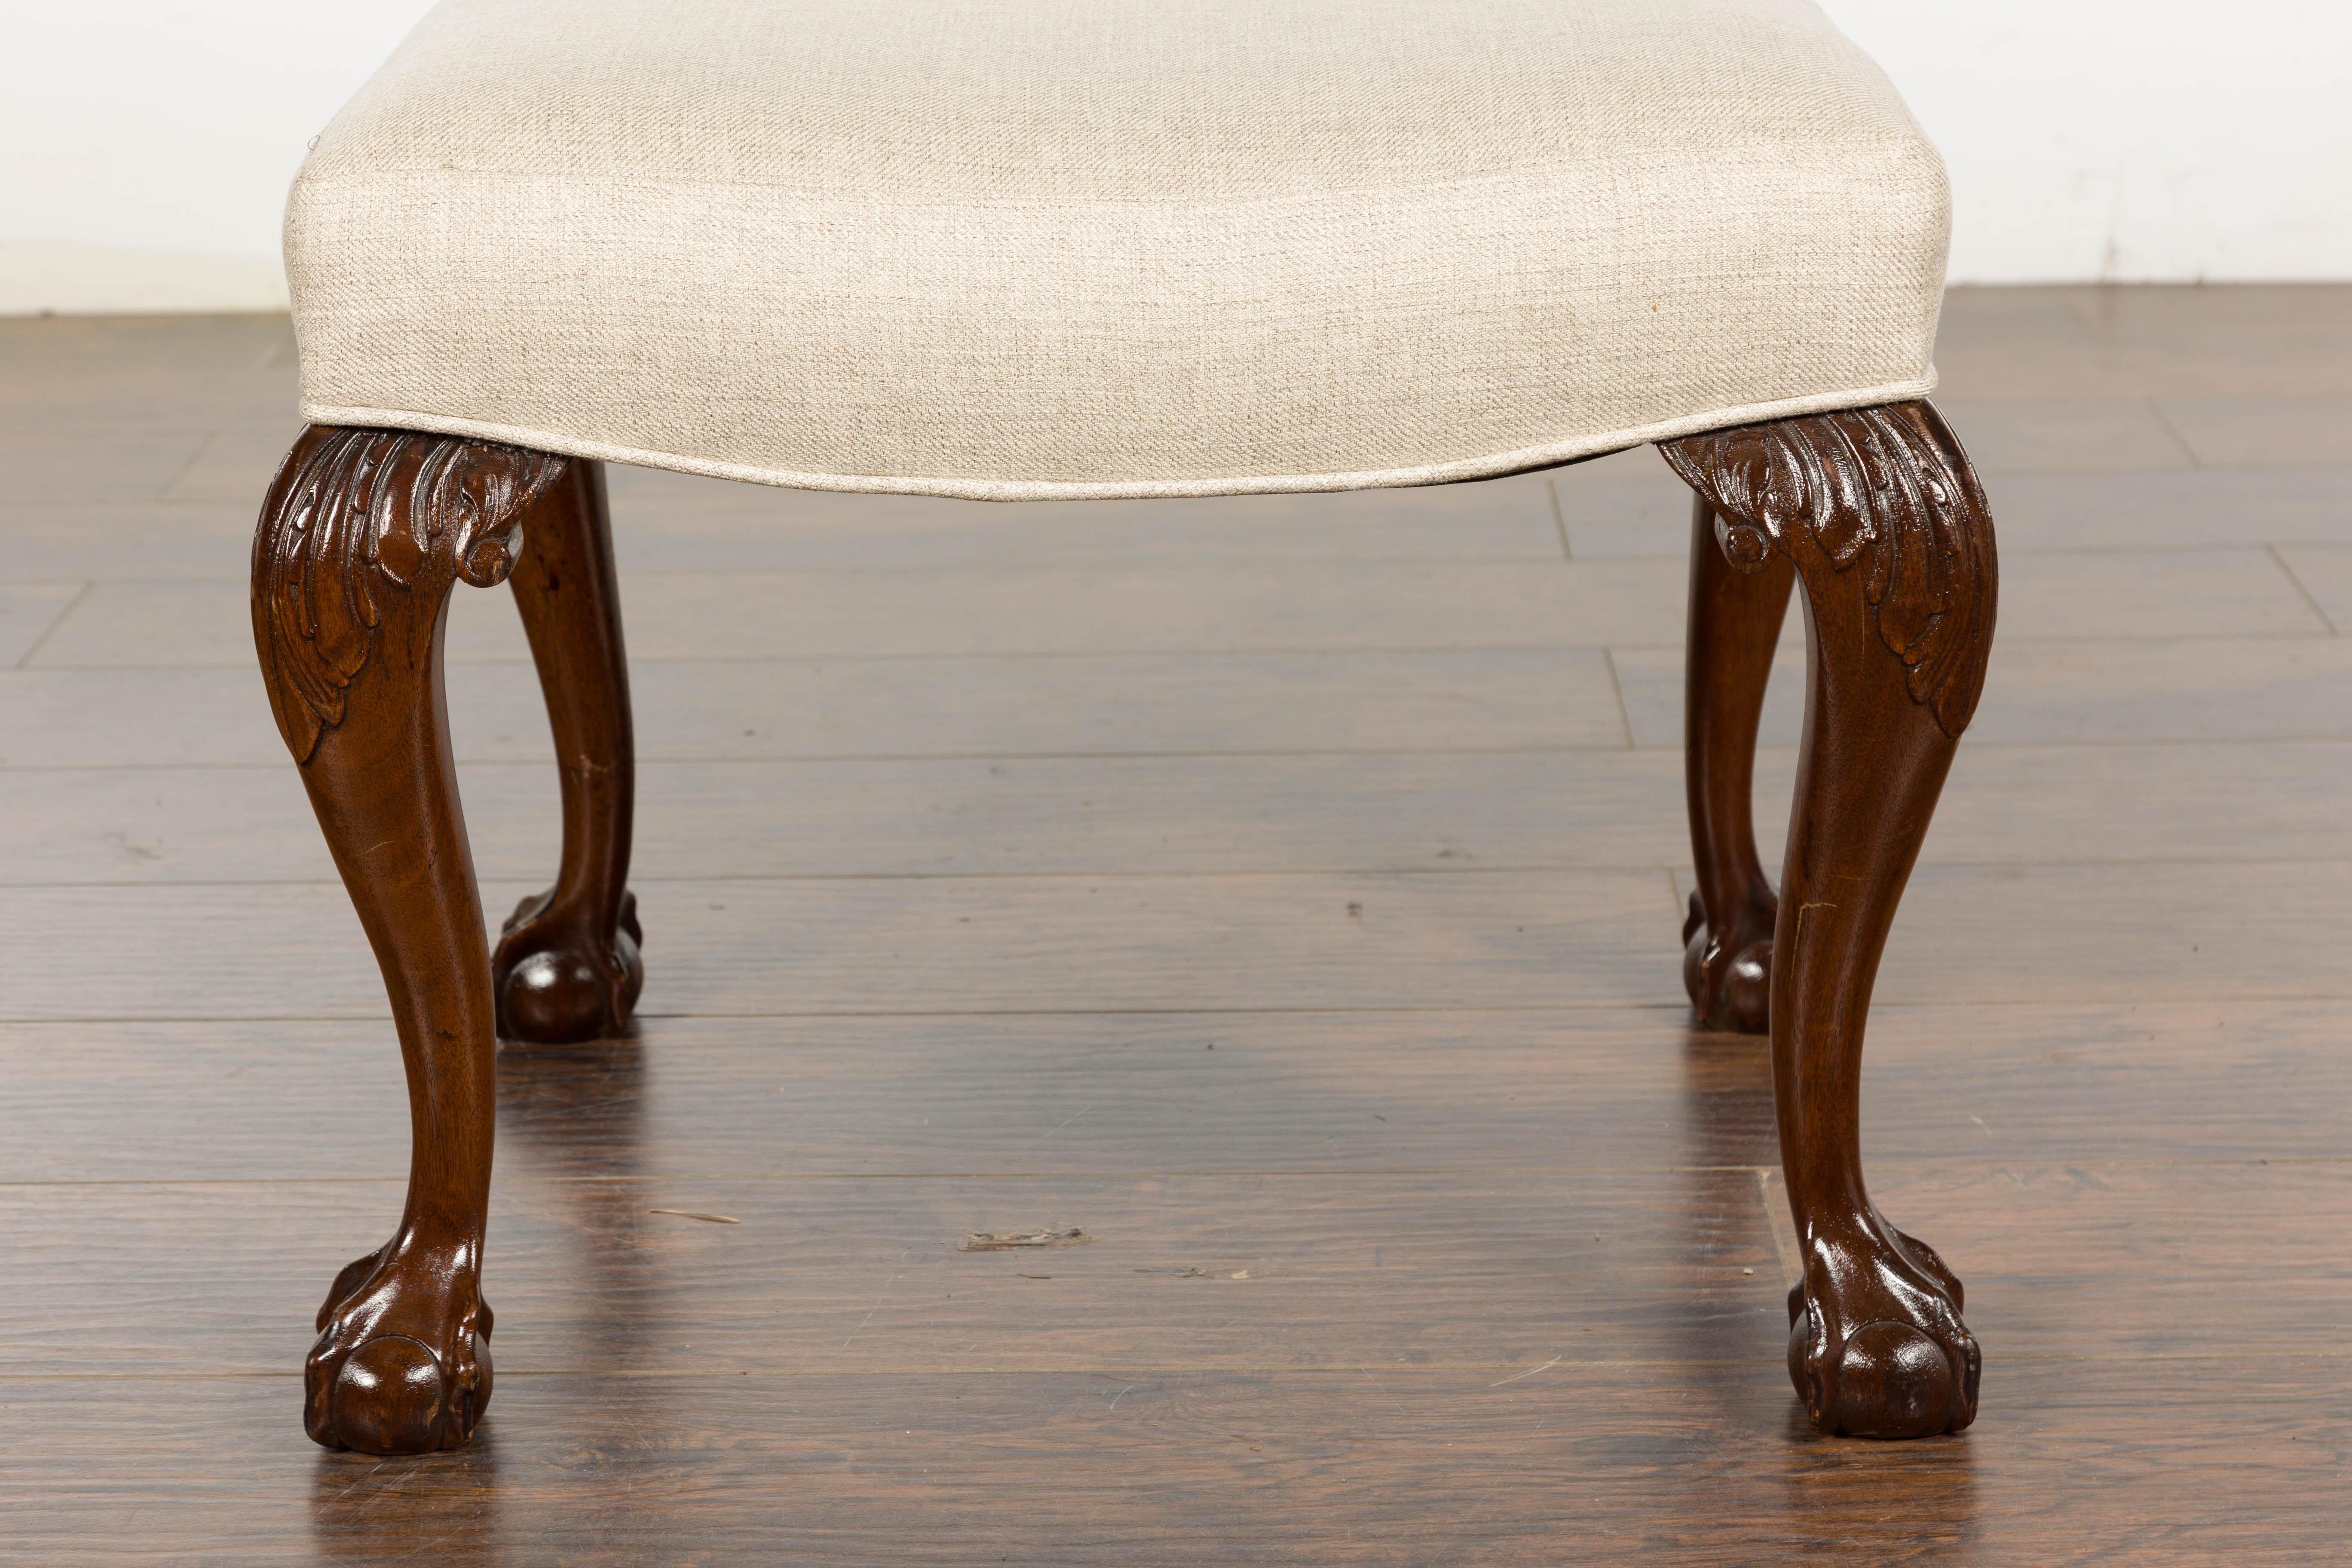 19th Century English Mahogany Upholstered Stool with Cabriole Legs For Sale 1